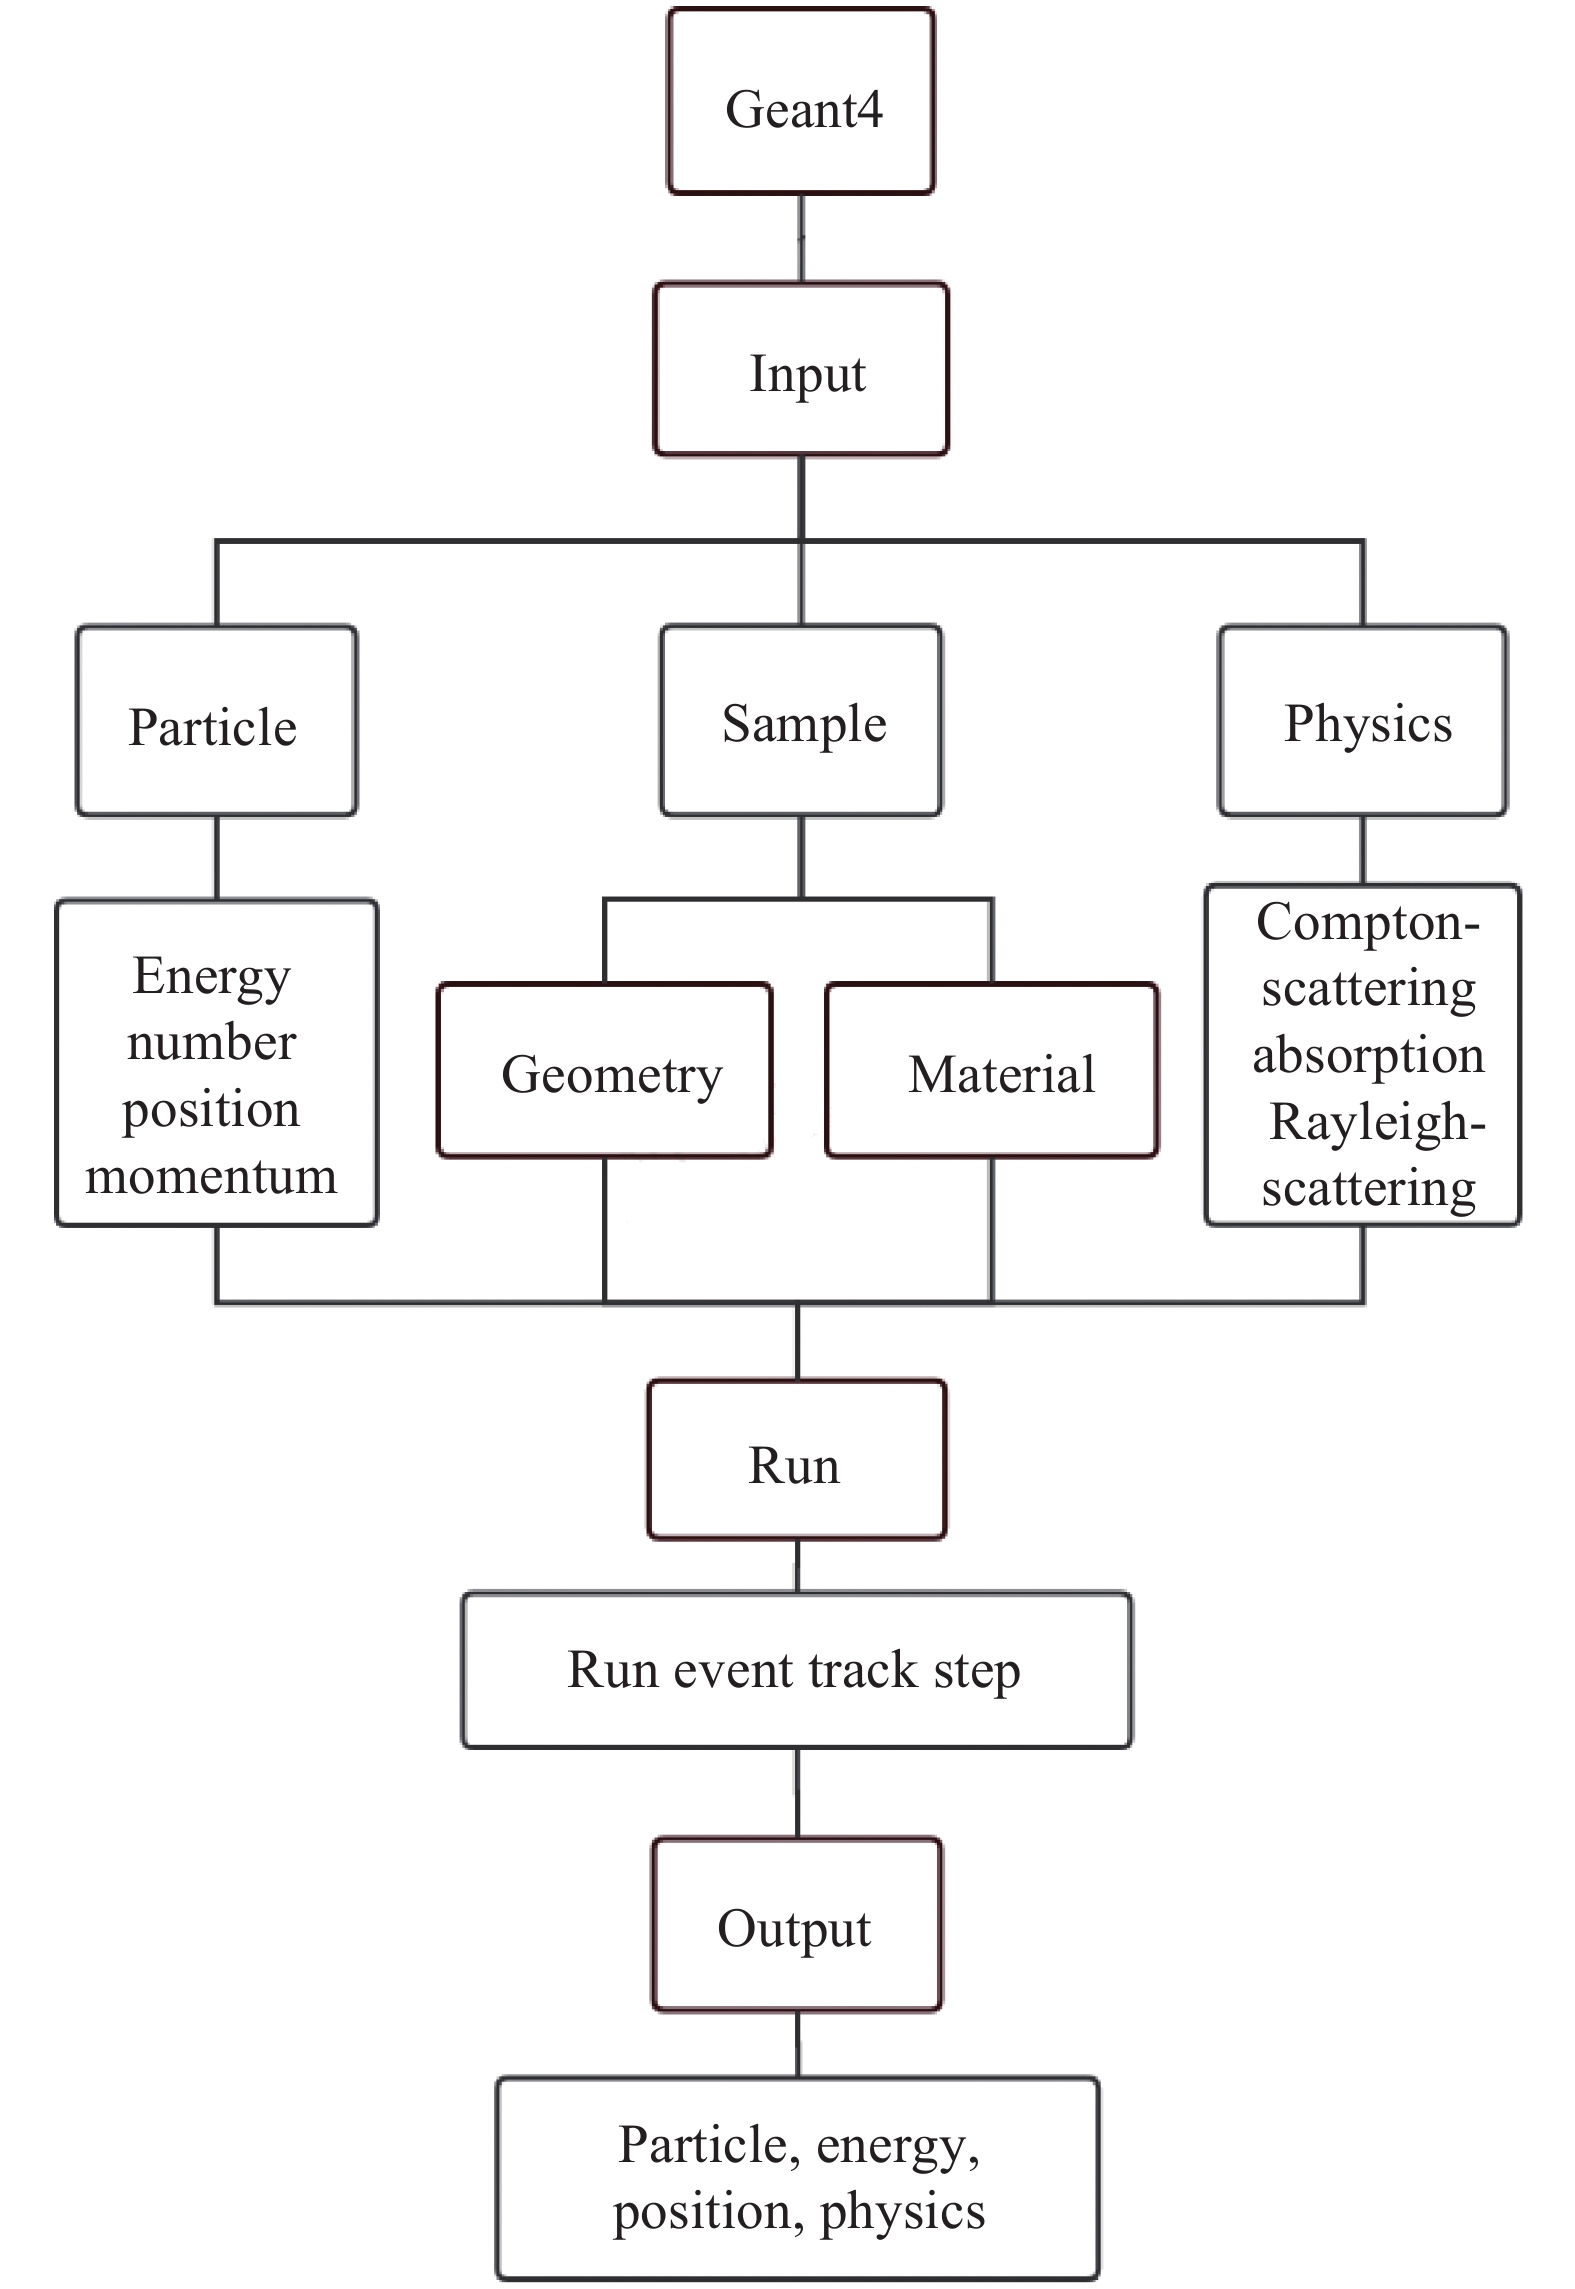 Flow chart of the Geant4 simulation